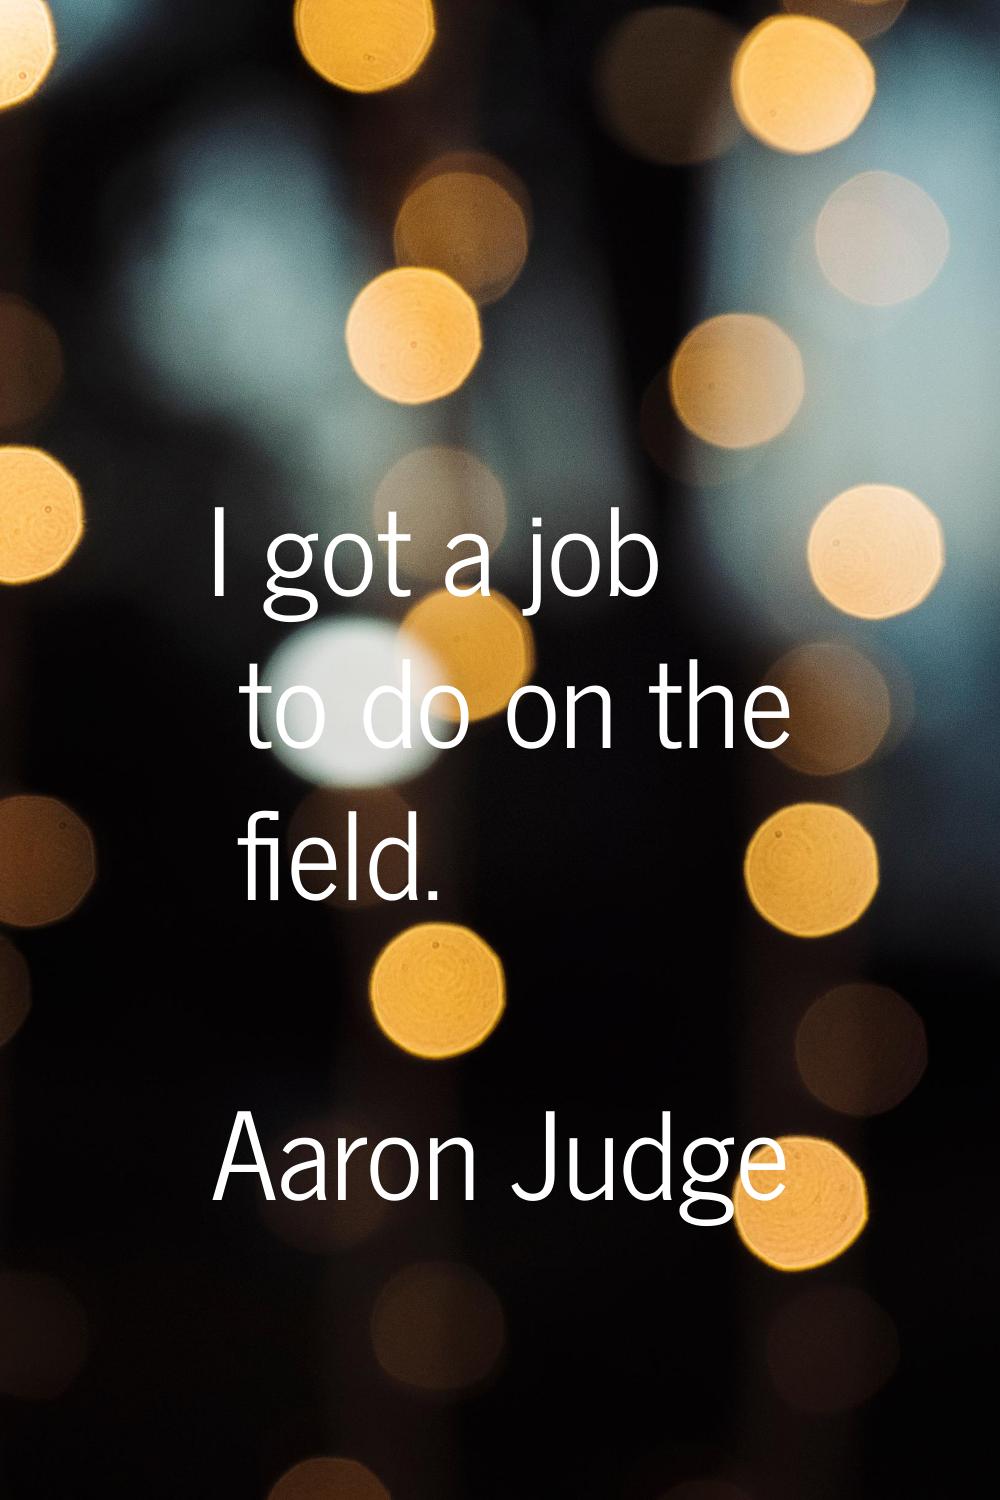 I got a job to do on the field.